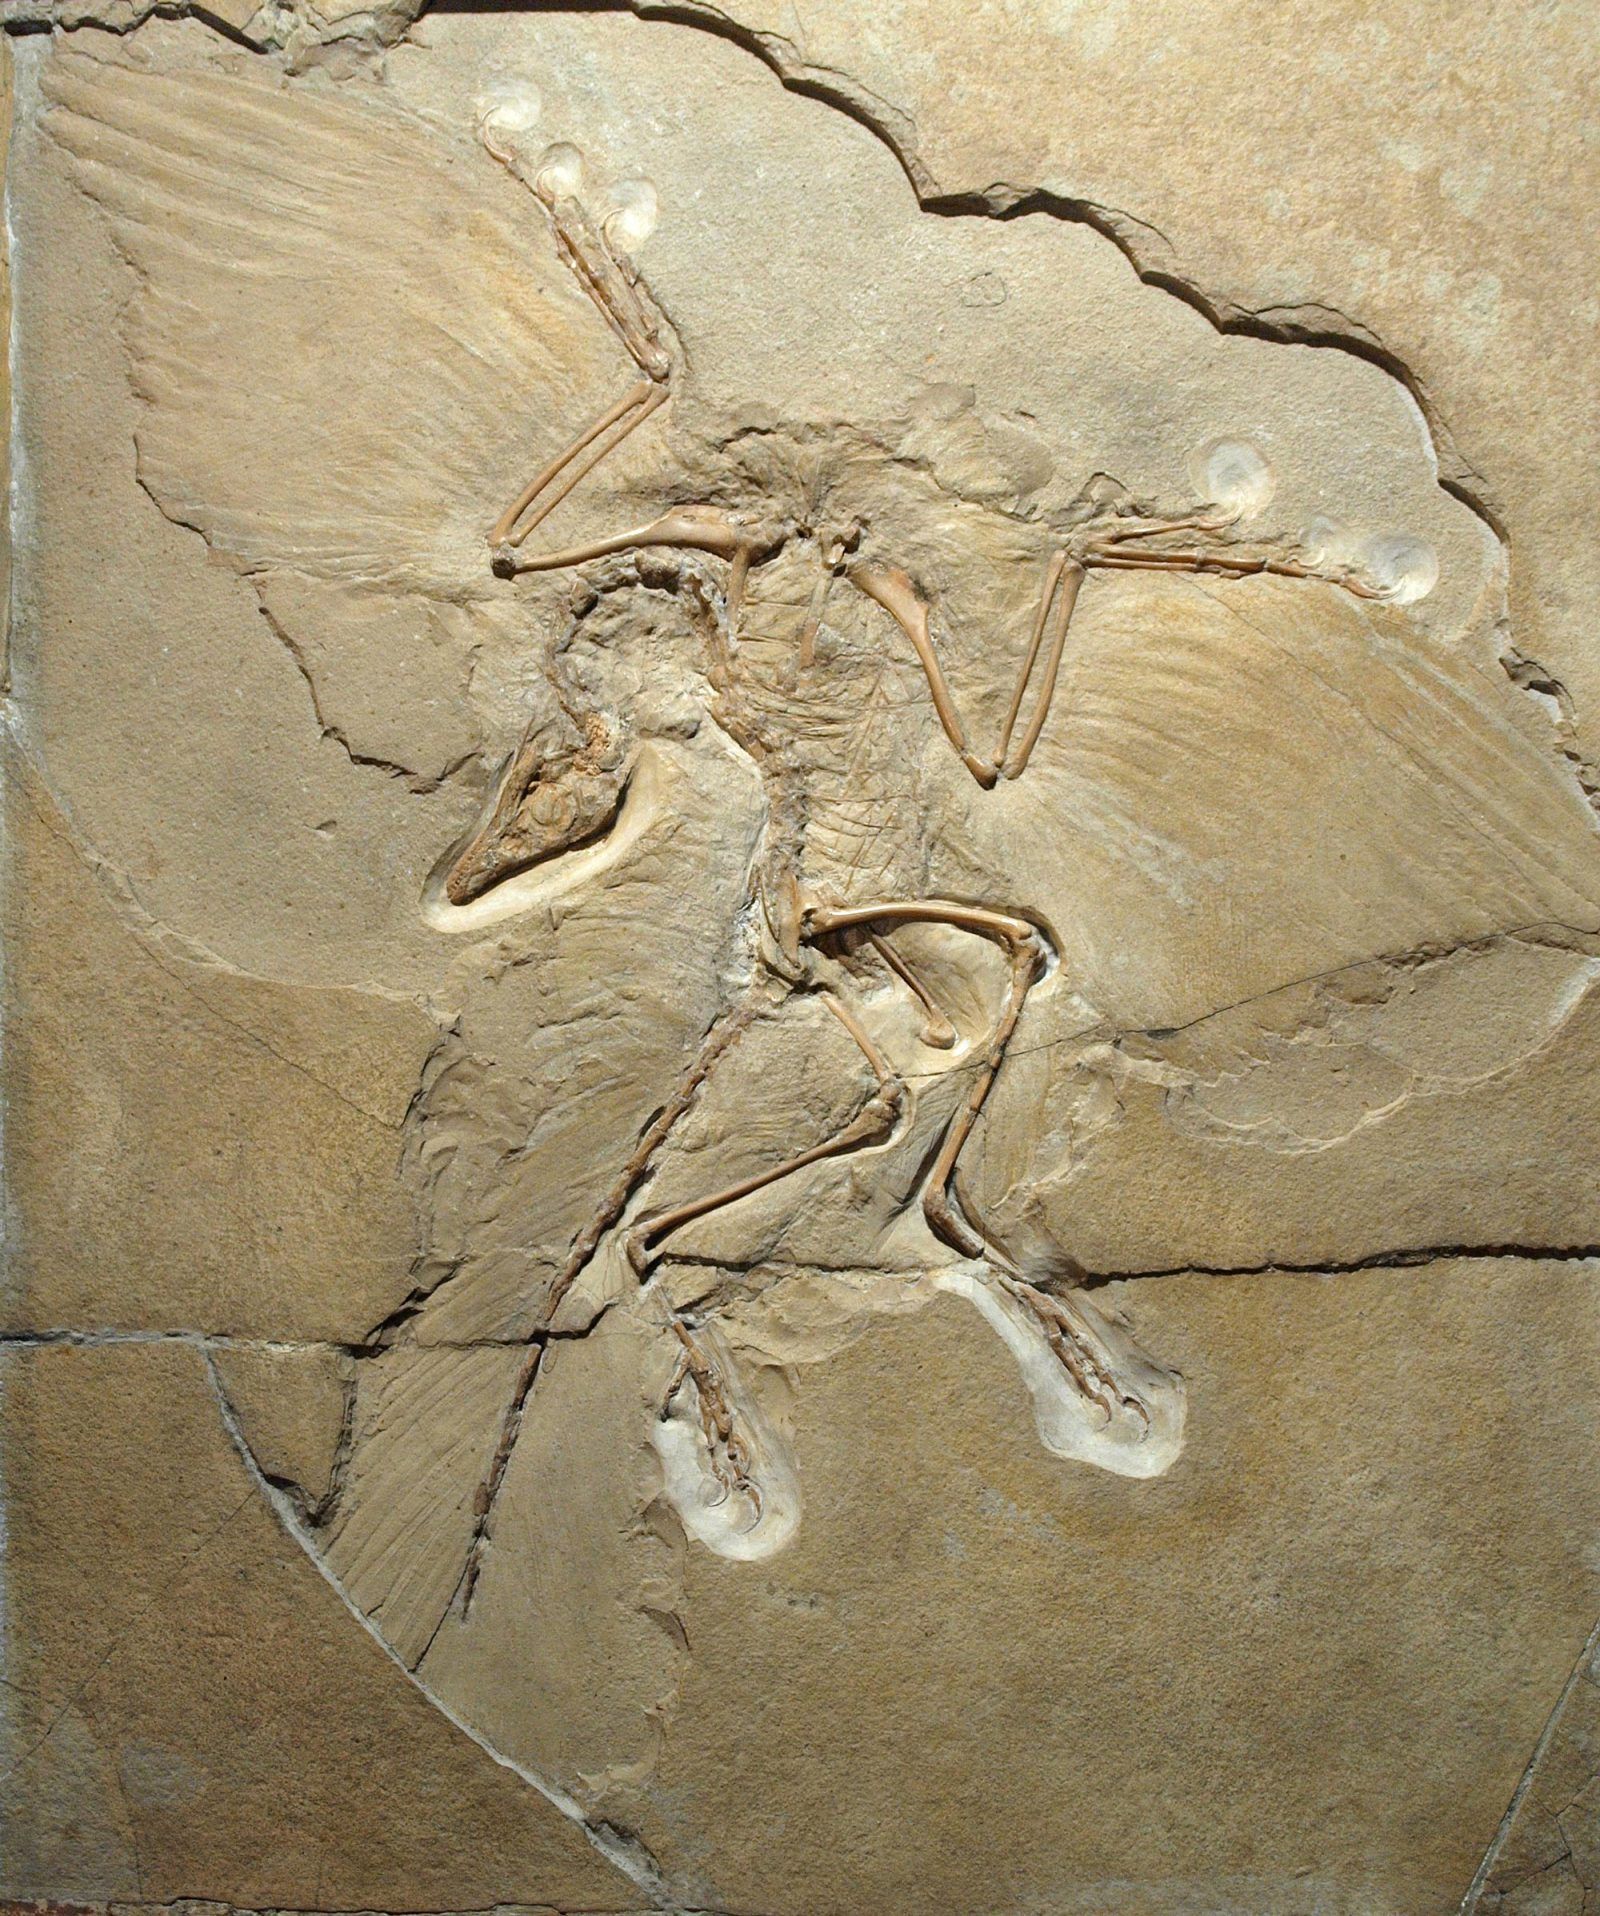 Archaeopteryx - the missing link between dinosaurs and birds? | Museum Wales